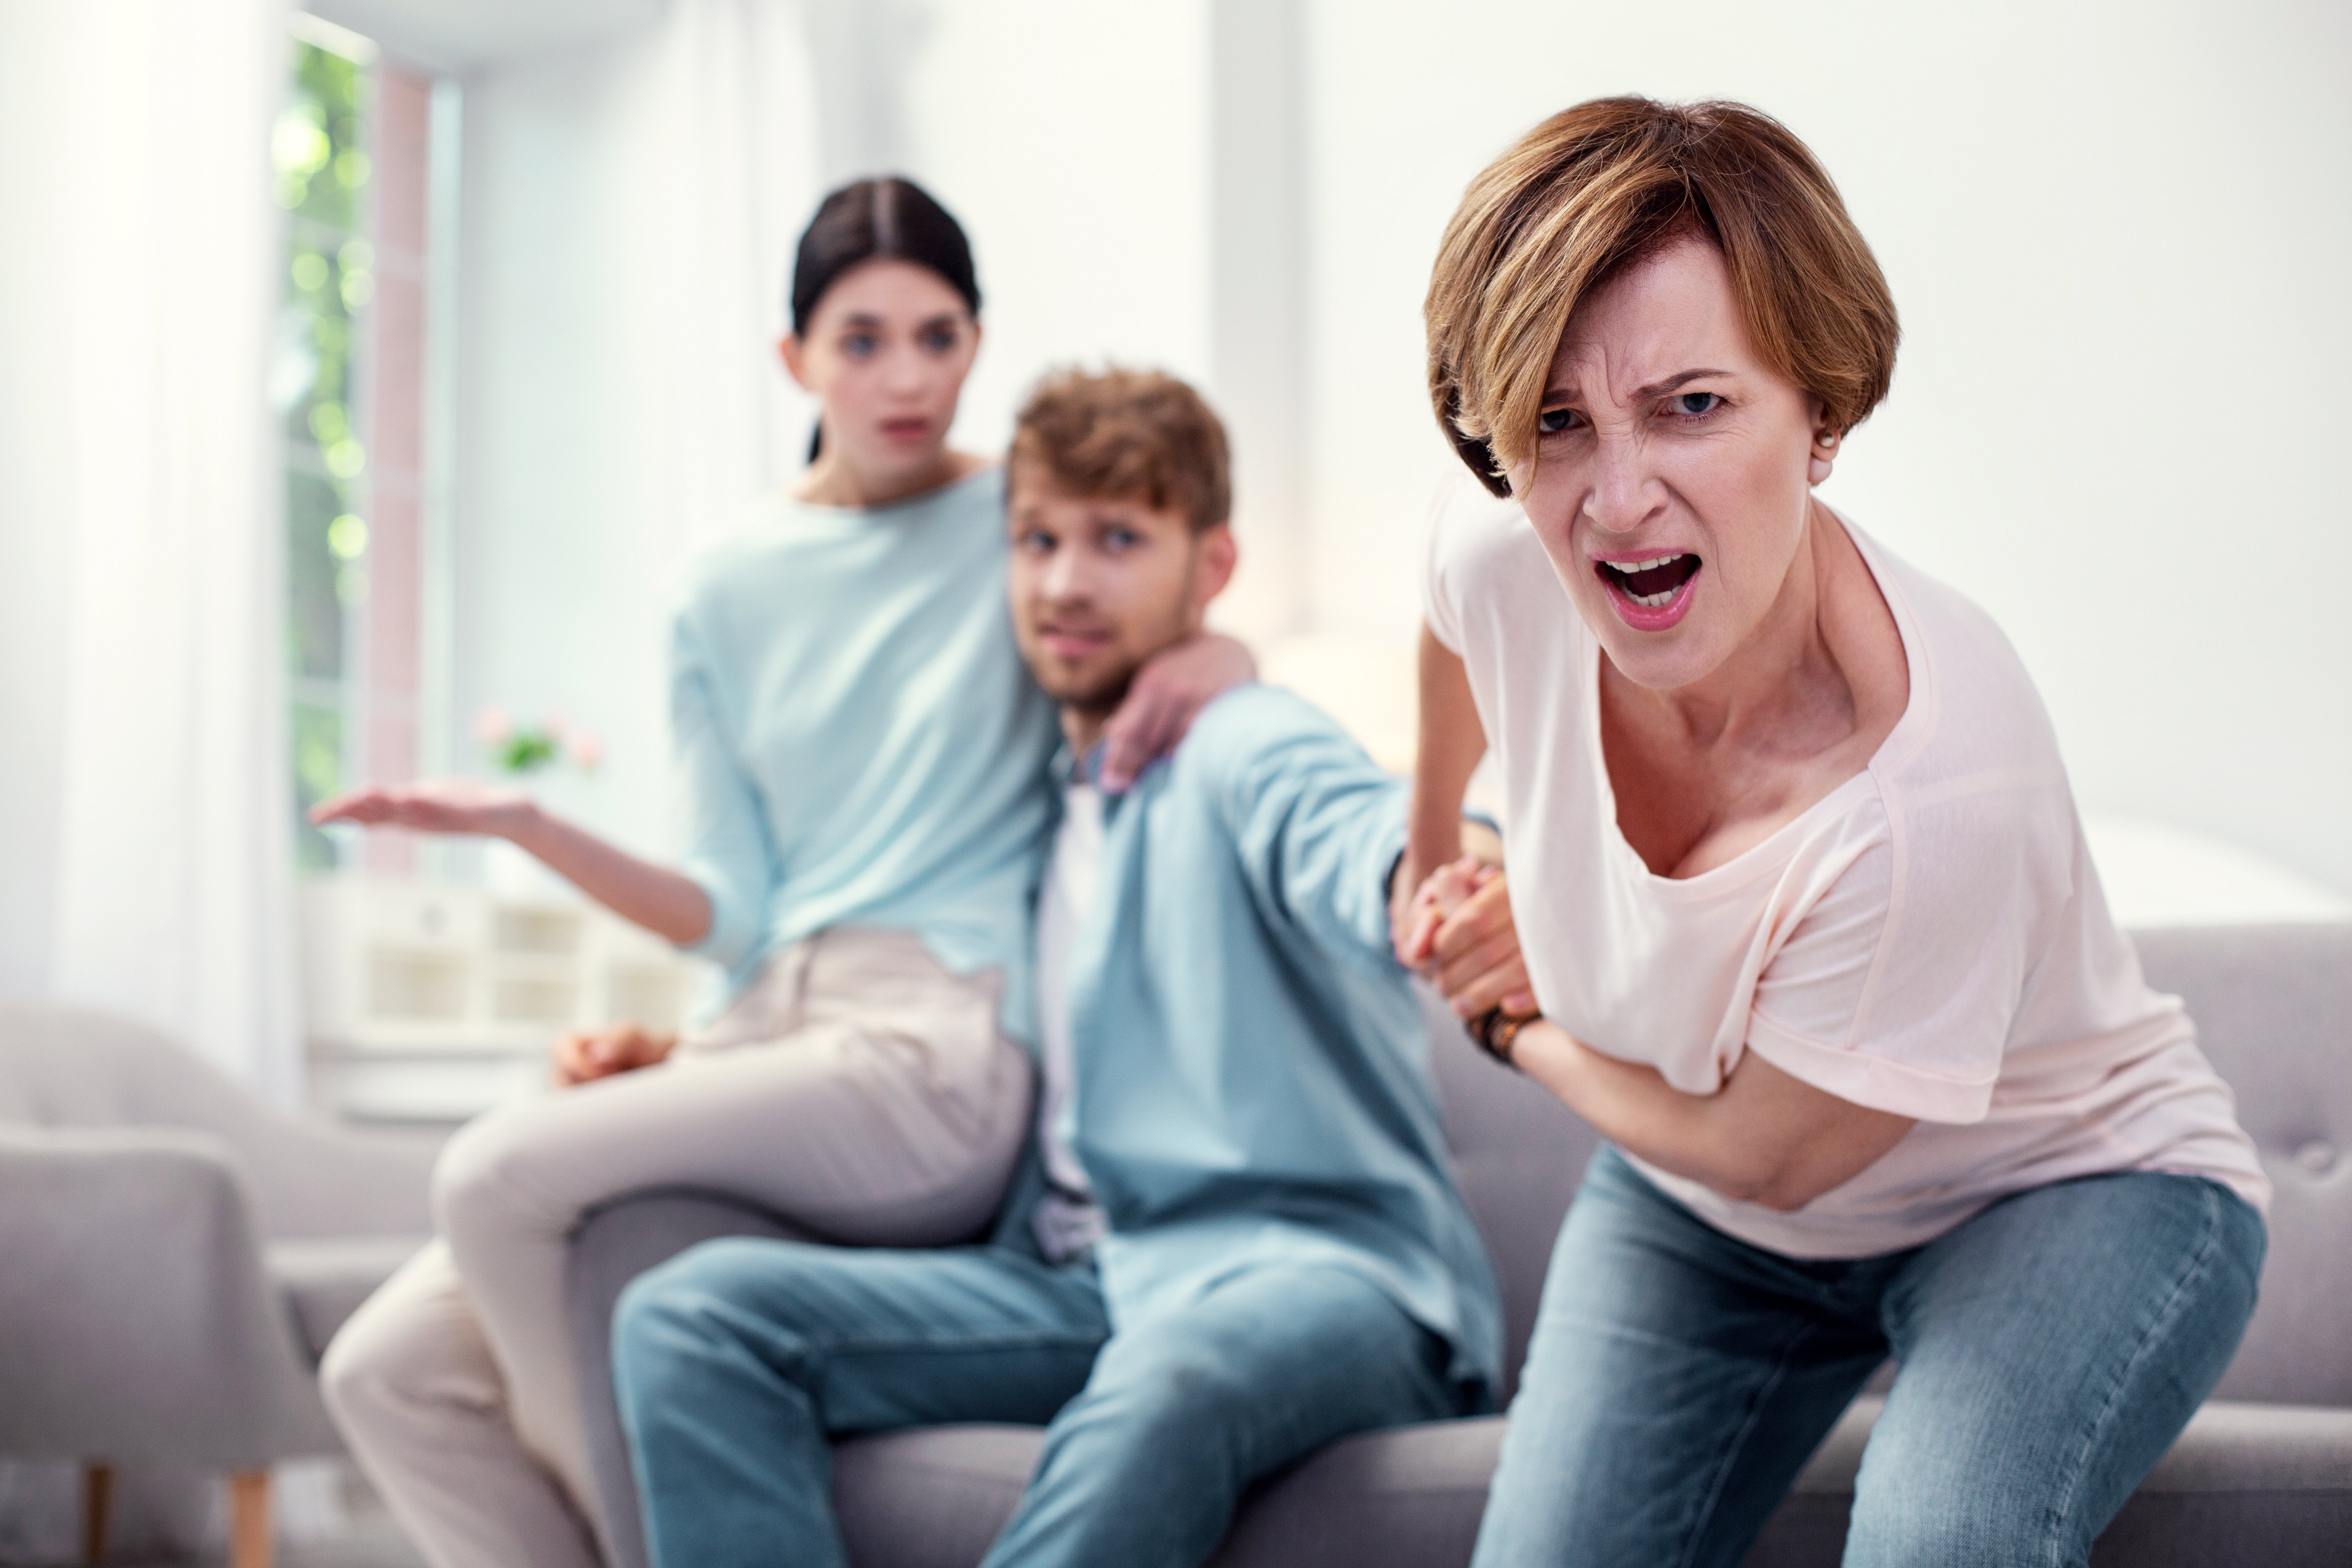 Angry woman dragging son while younger woman sits next to him. | Source: Shutterstock